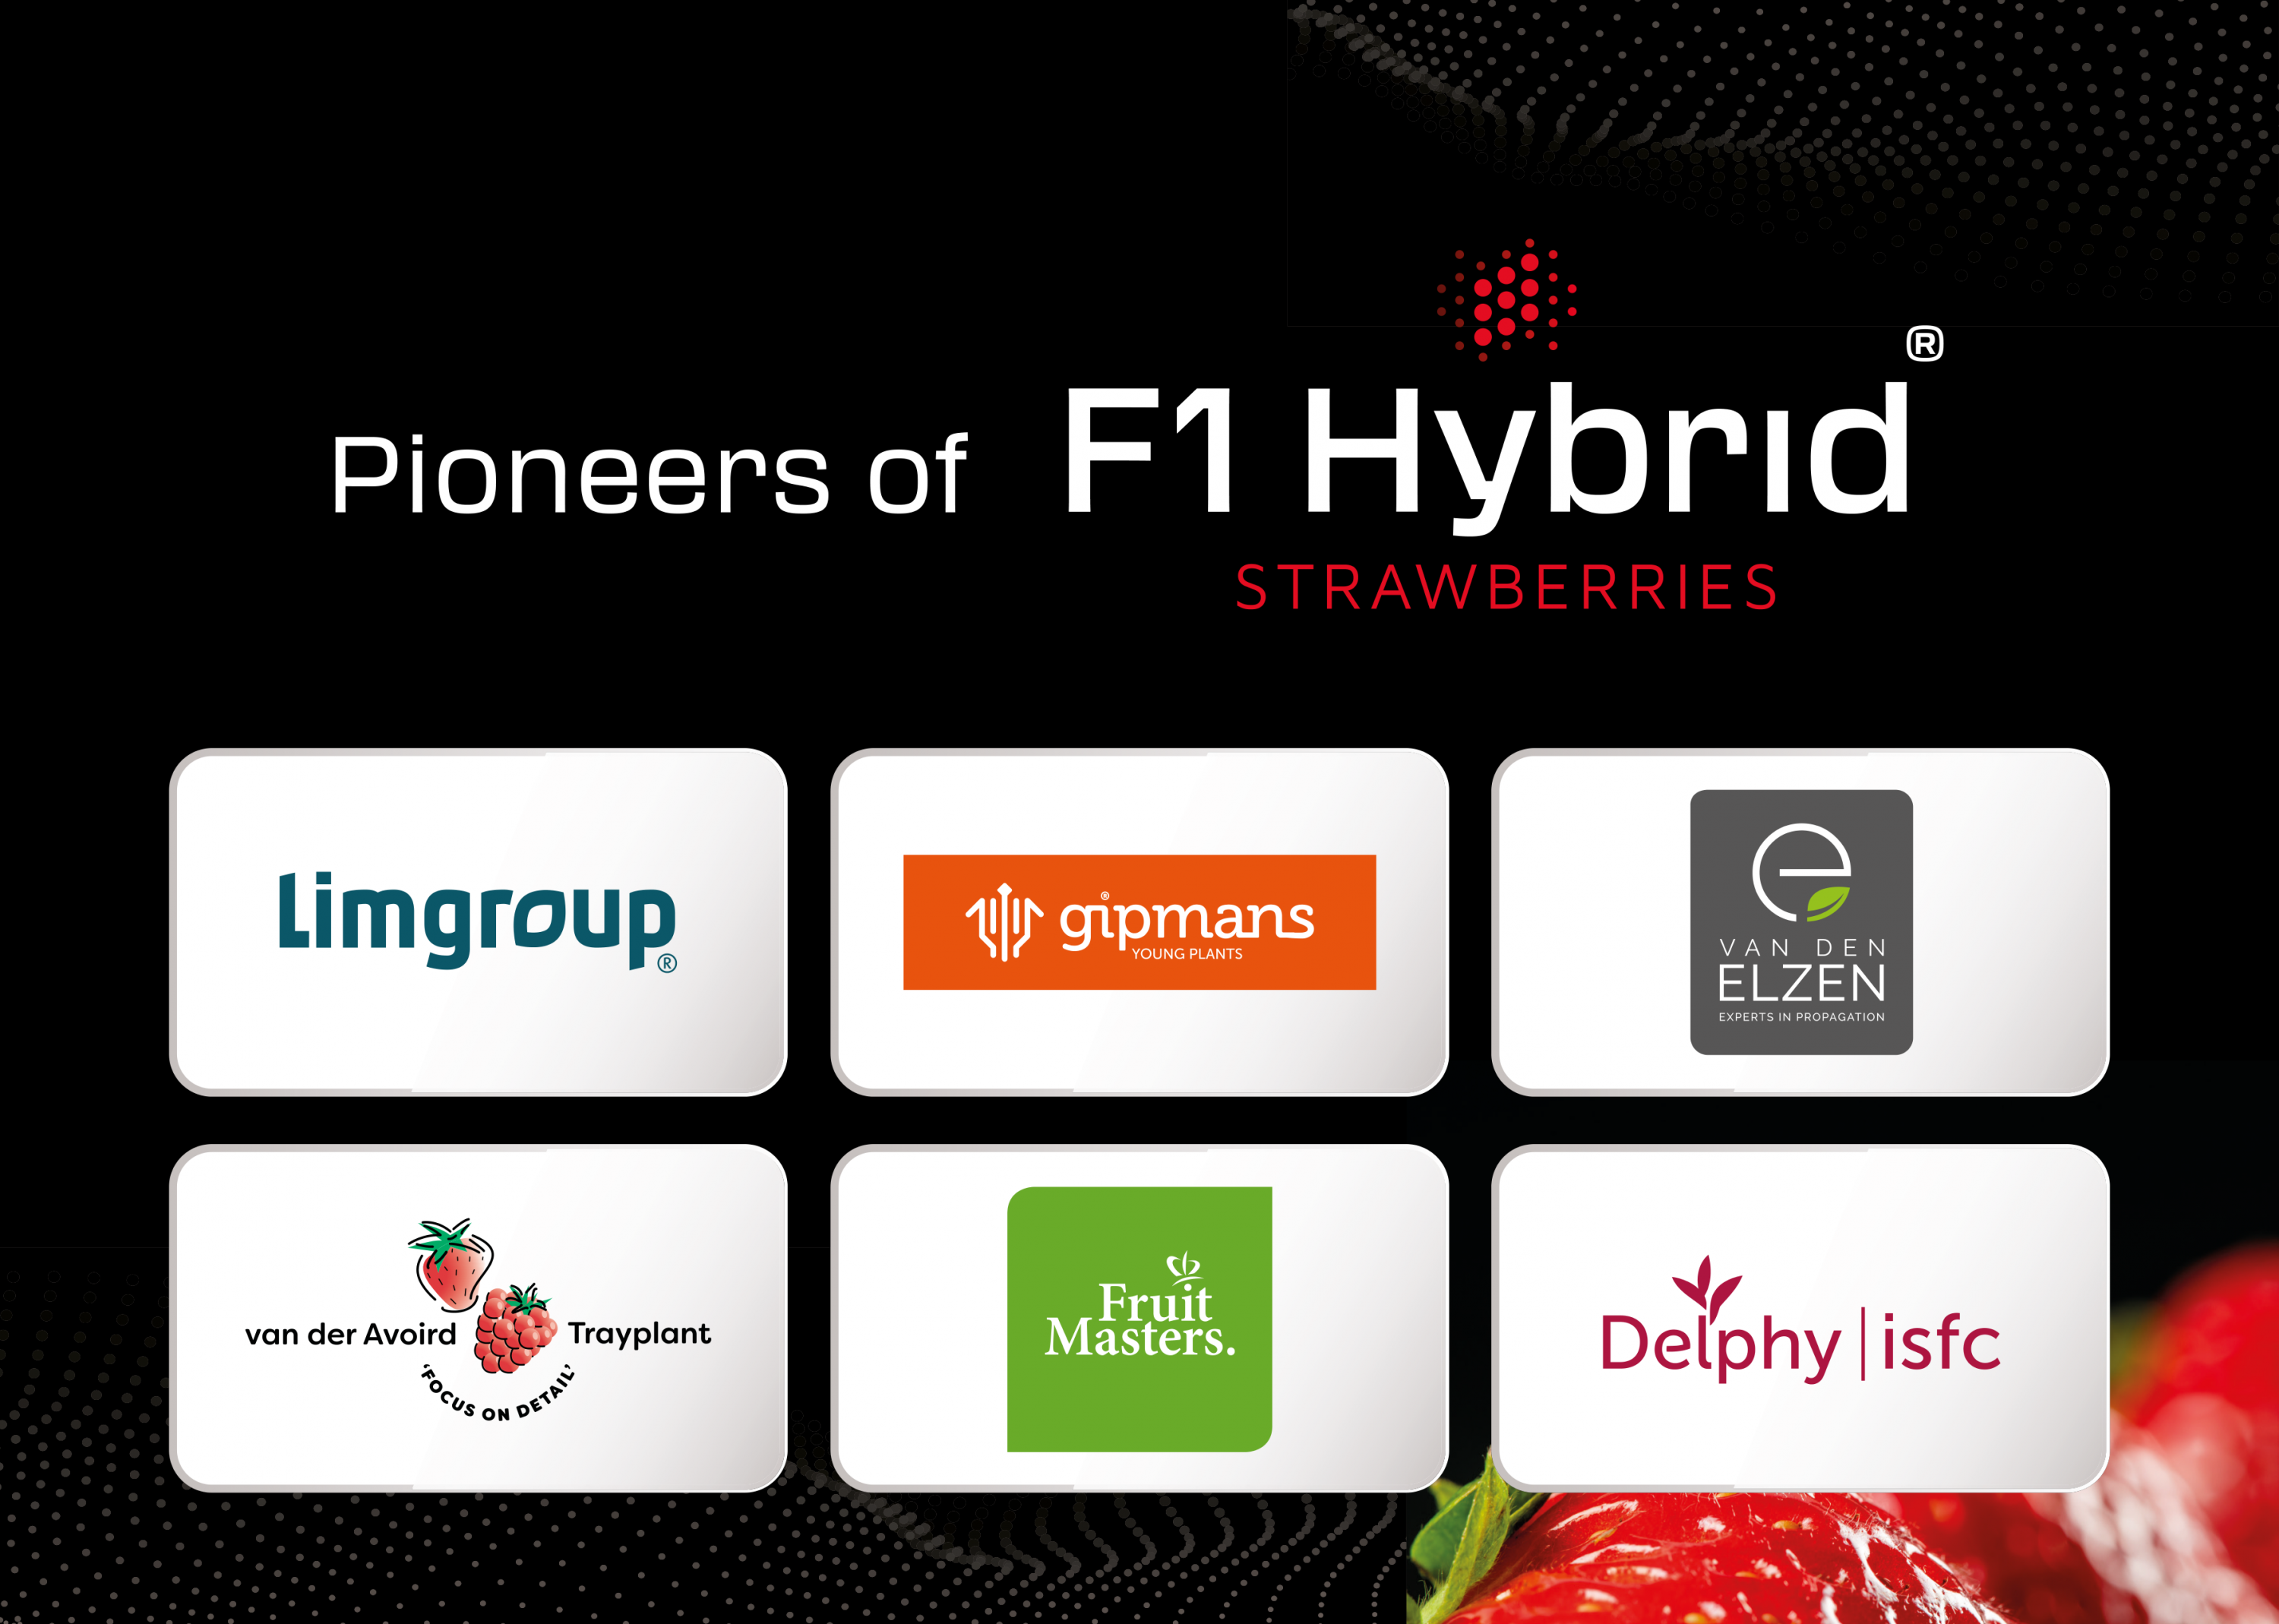 Bord A4 - Proud partner of F1 Hybrid - Limgroup (1).png